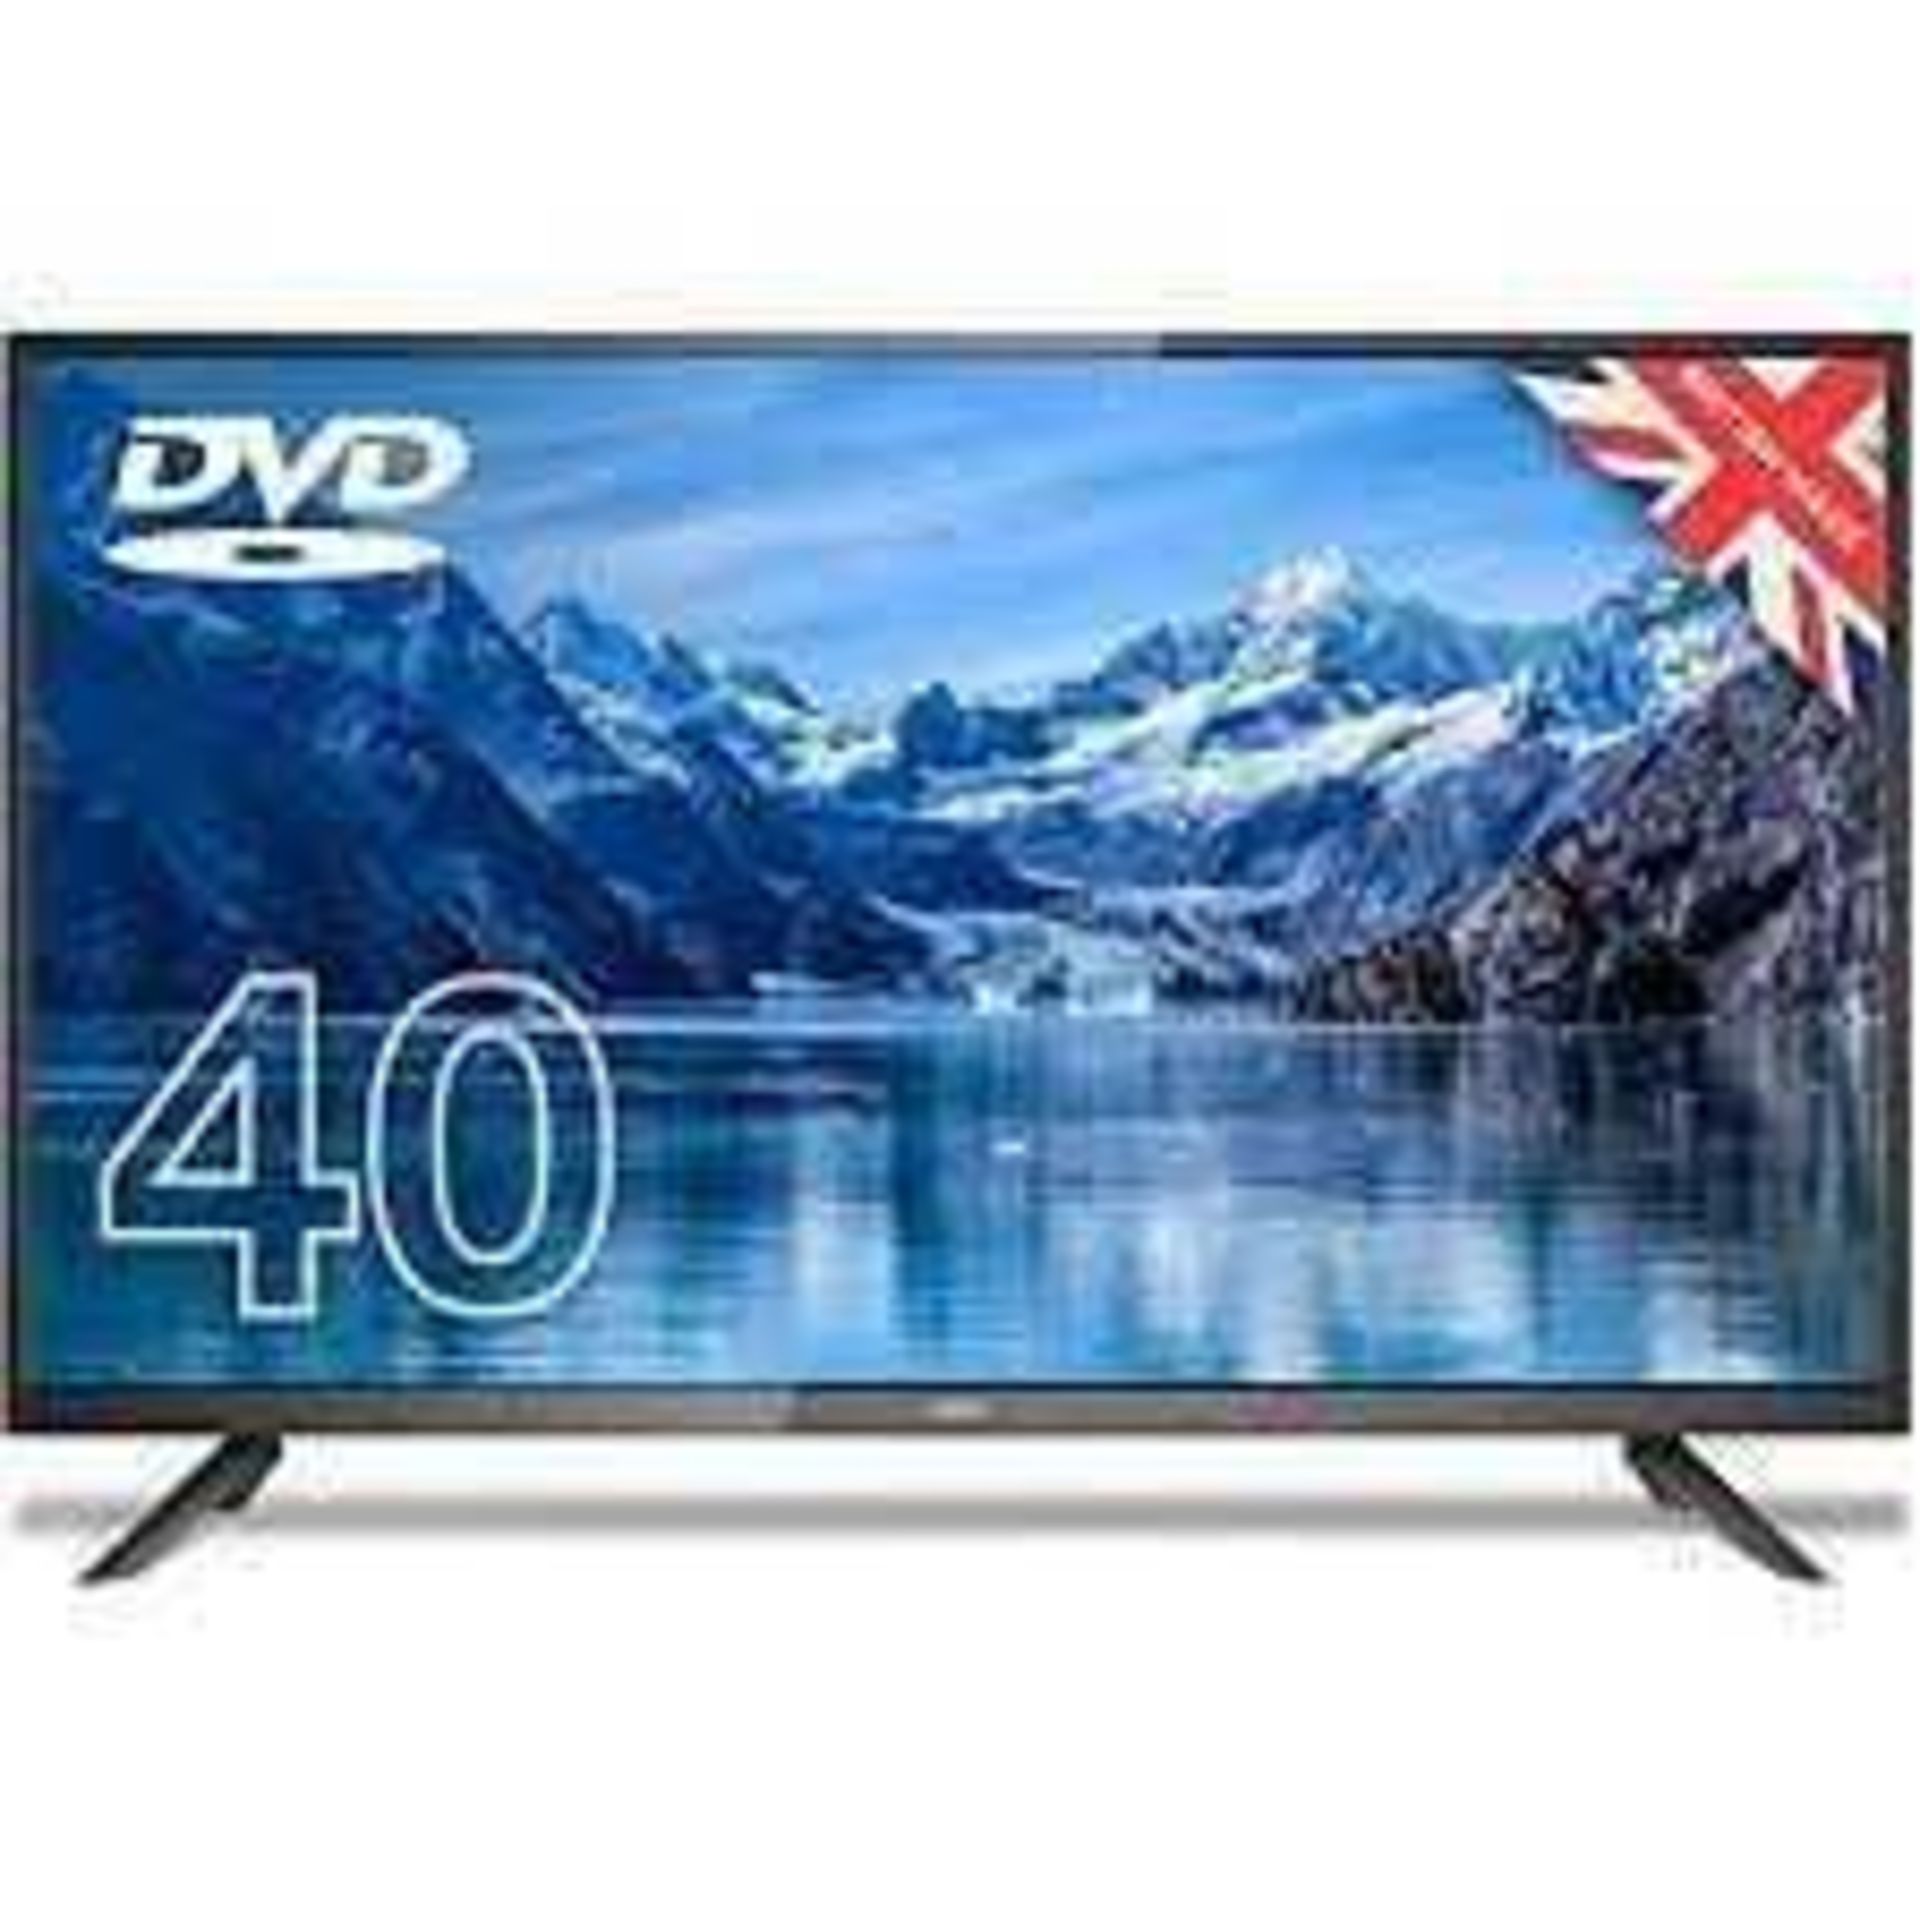 RRP £250 Boxed Cello 40" Full Hd Tv With Built In Dvd Player